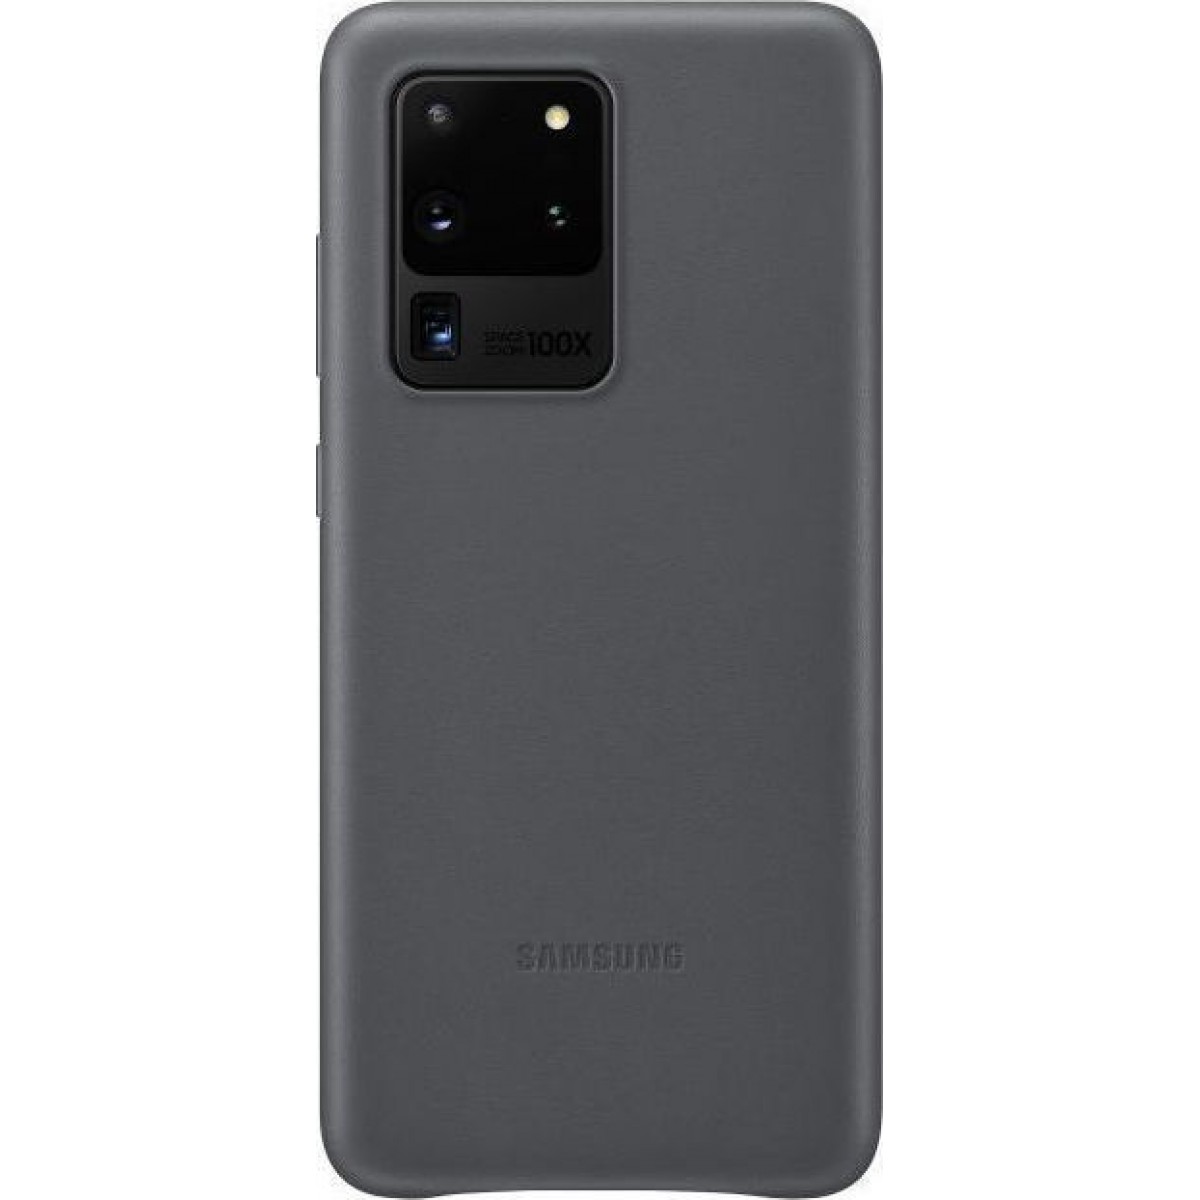 Samsung Leather Cover Galaxy S20 Ultra_SM-G988, grey